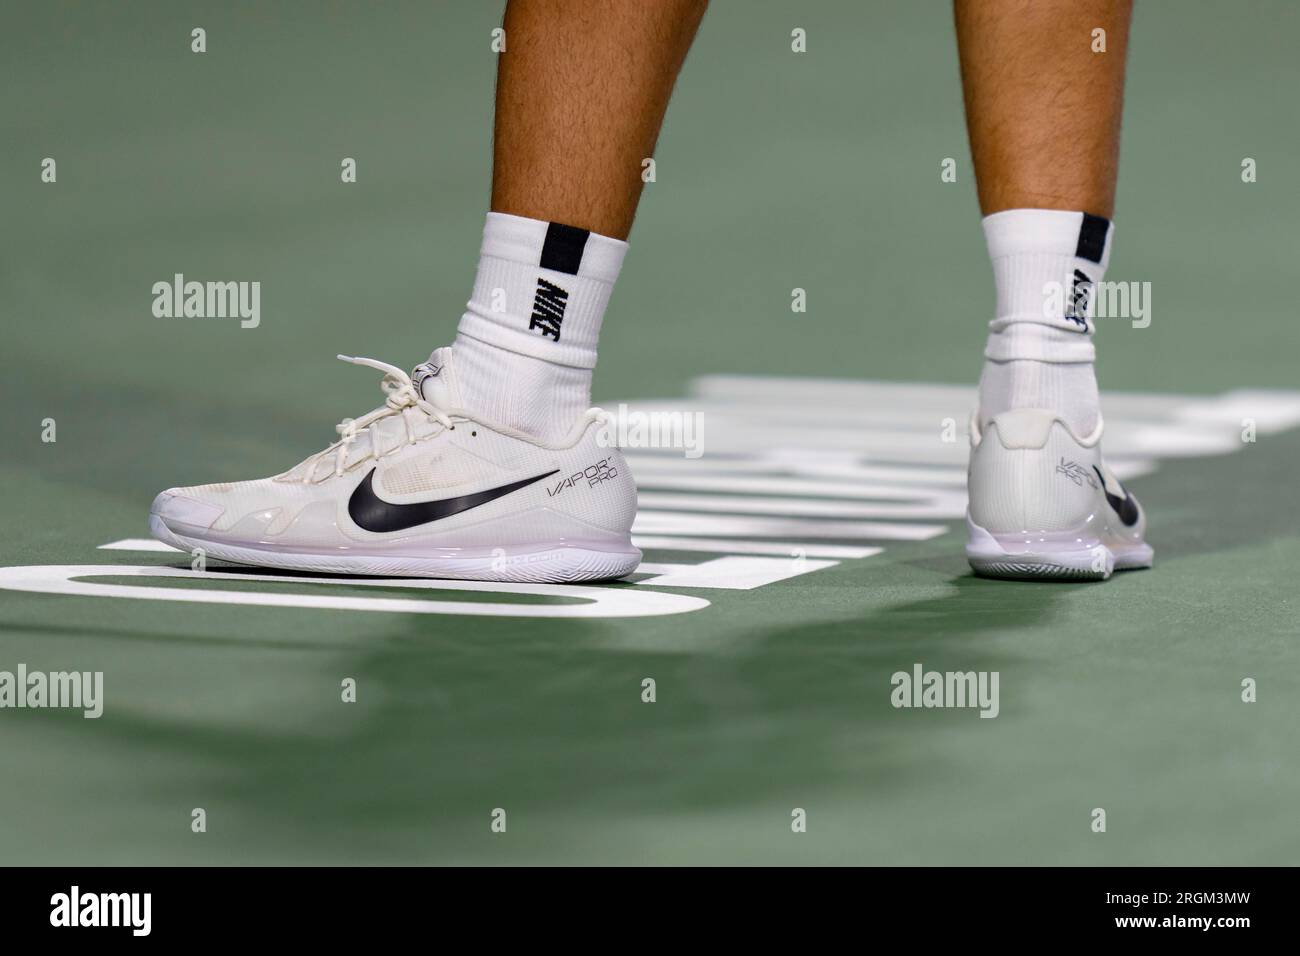 TORONTO, ON - AUGUST 09: Closeup of the Nike Vapour Pro shoes worn by  Carlos Alcaraz of Spain during his second round match of the National Bank  Open, part of the Hologic